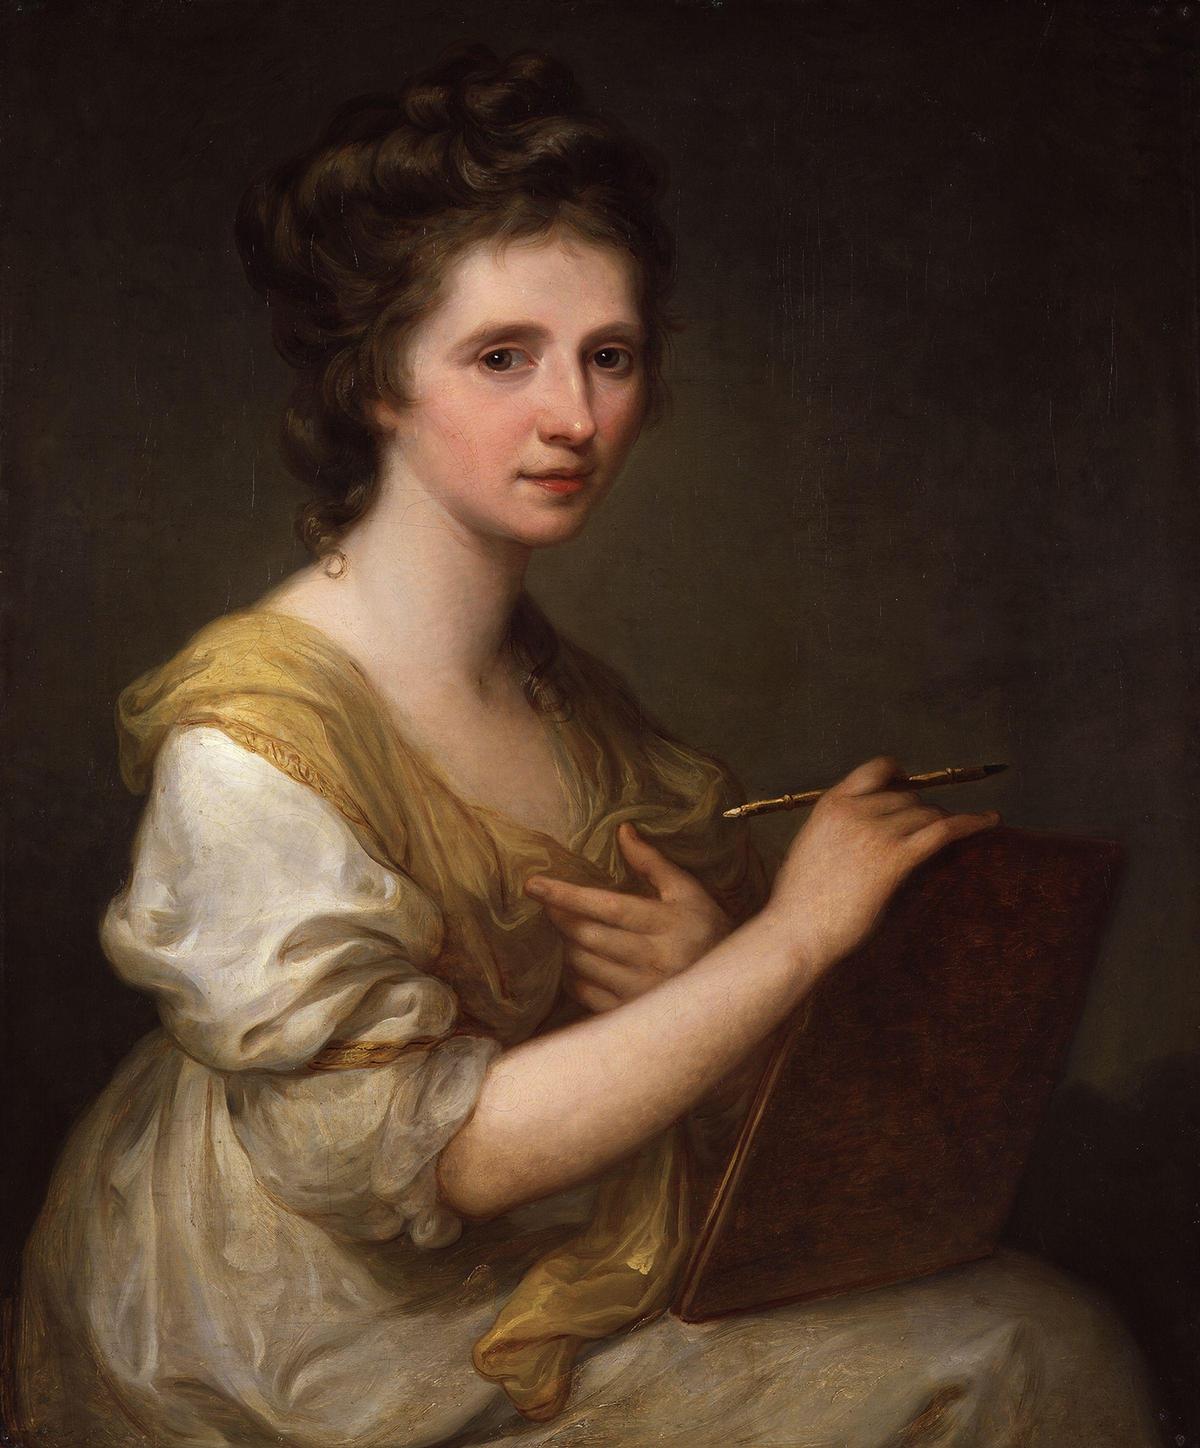  Self-portrait, between 1770–1775, by Angelica Kauffmann. Oil on canvas. National Portrait Gallery, London. (PD-US)